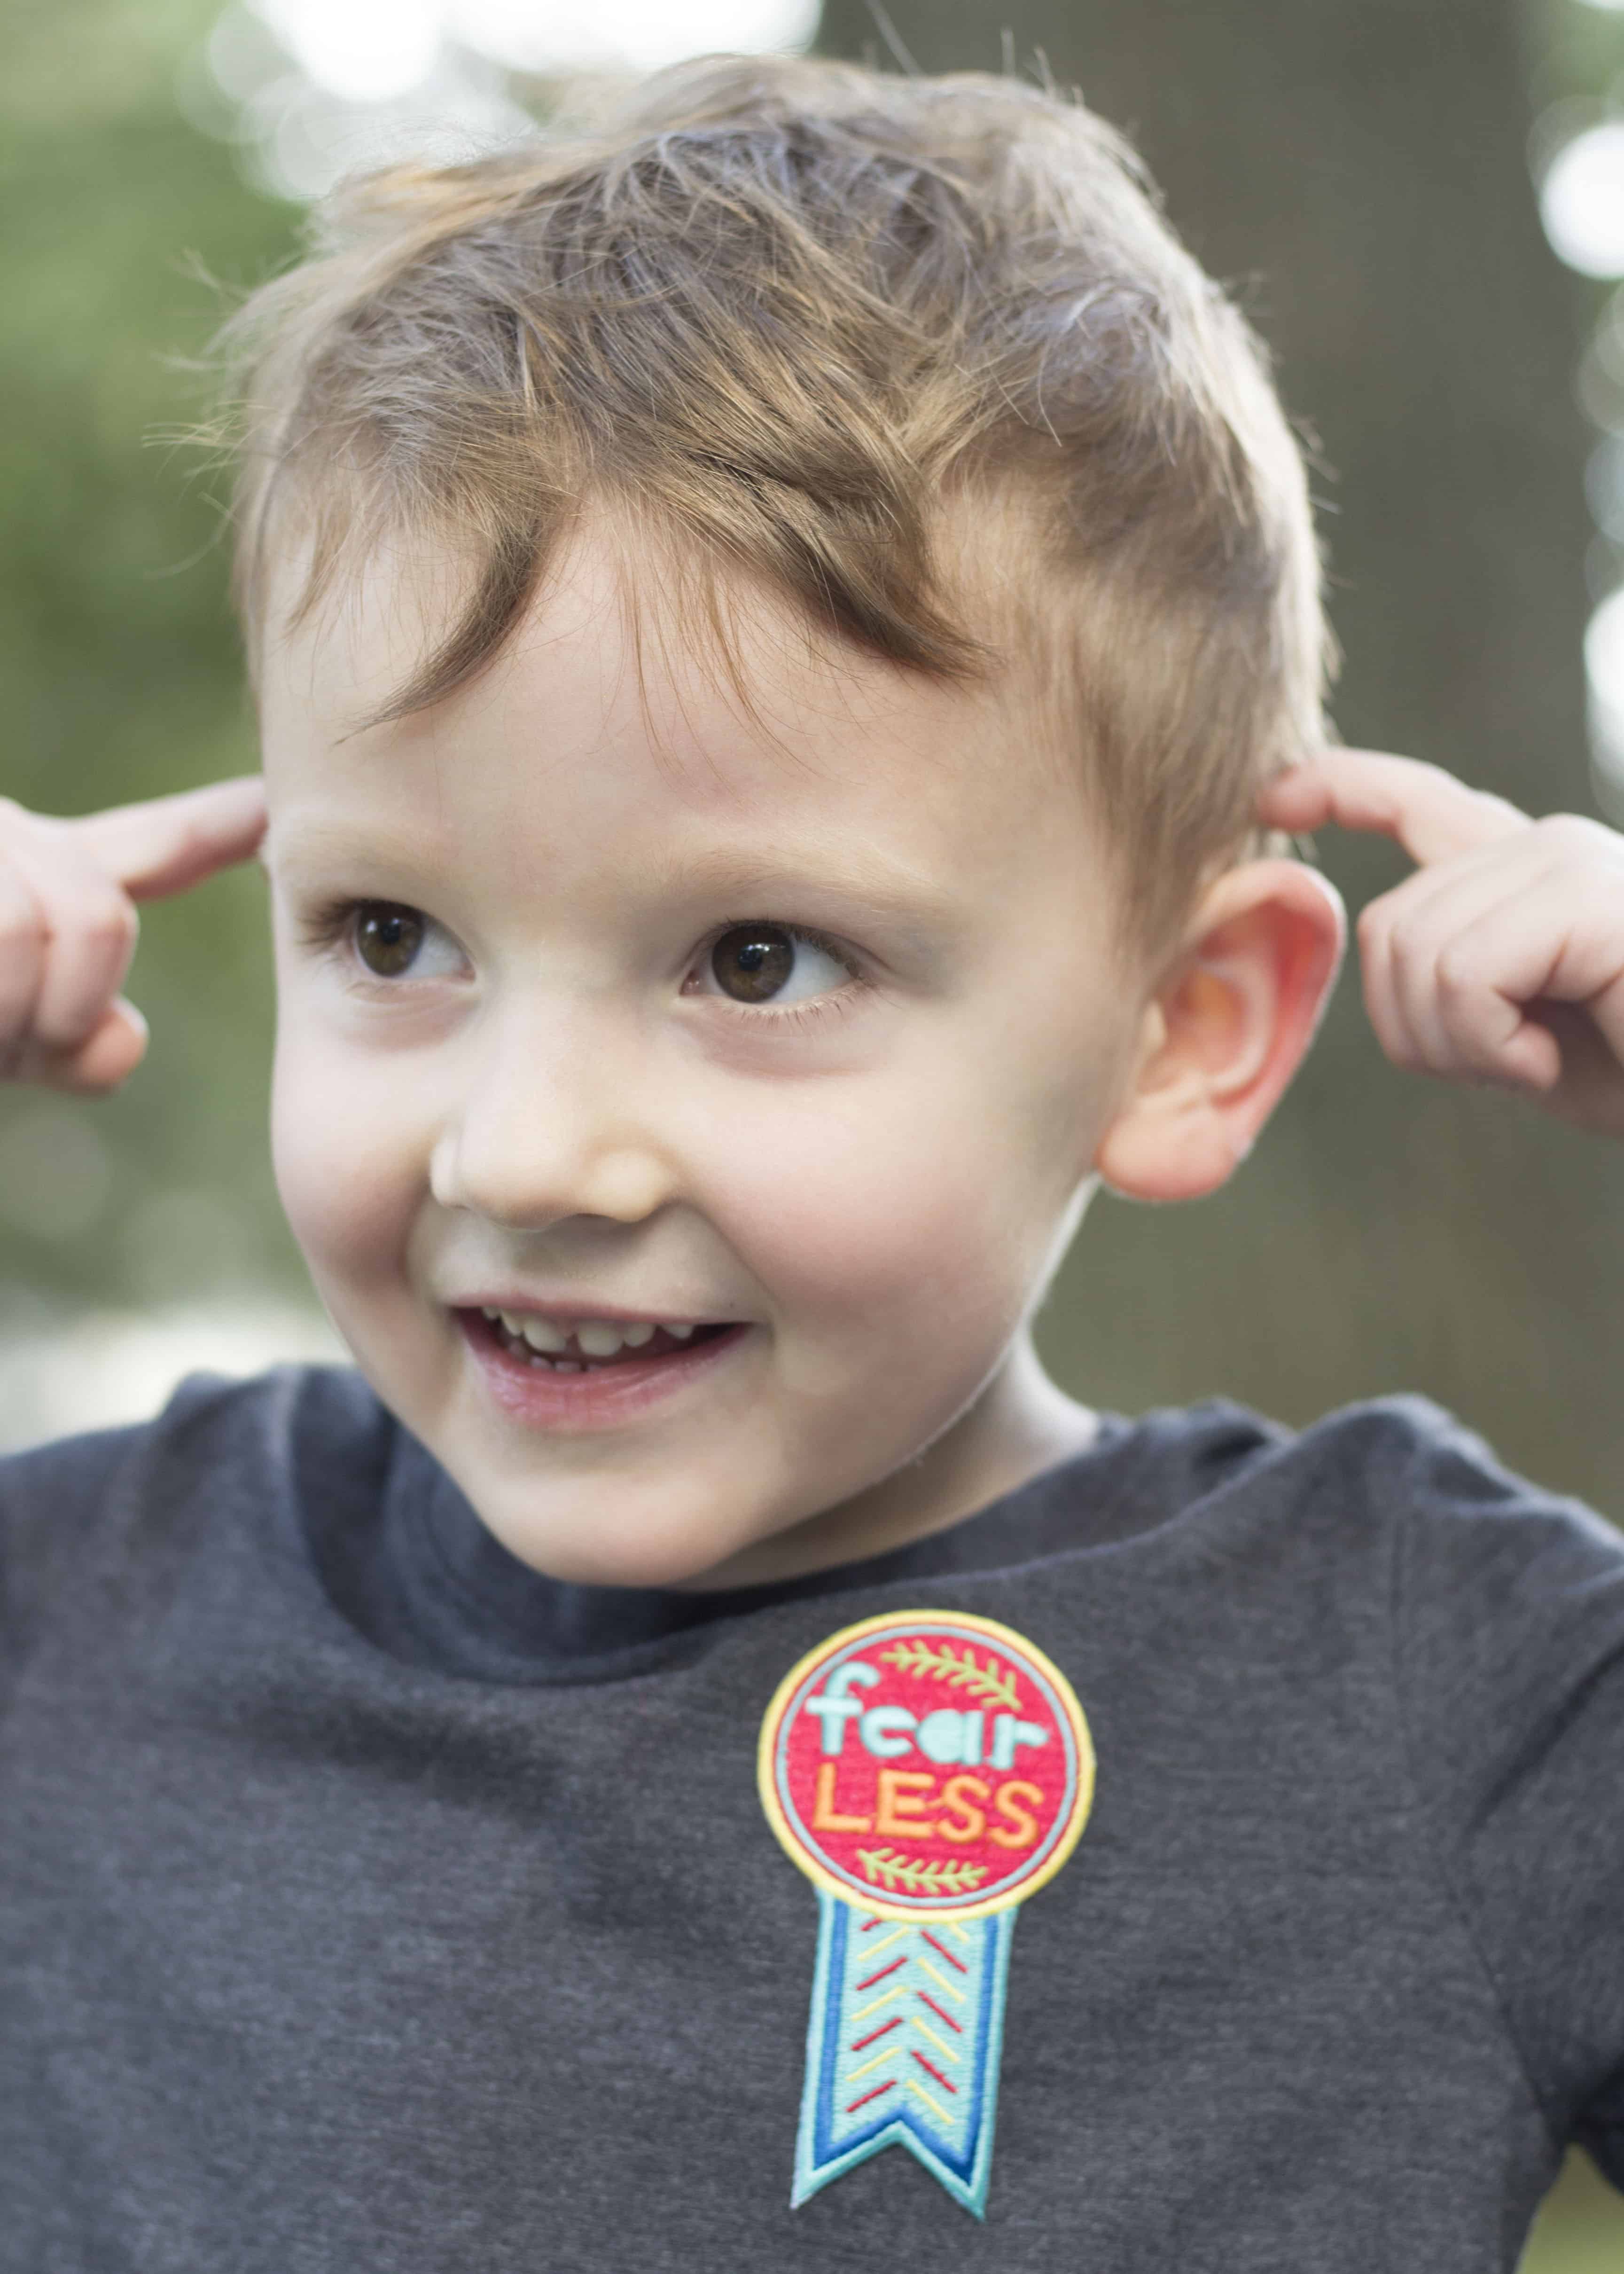 BOY WITH FEARLESS PATCH